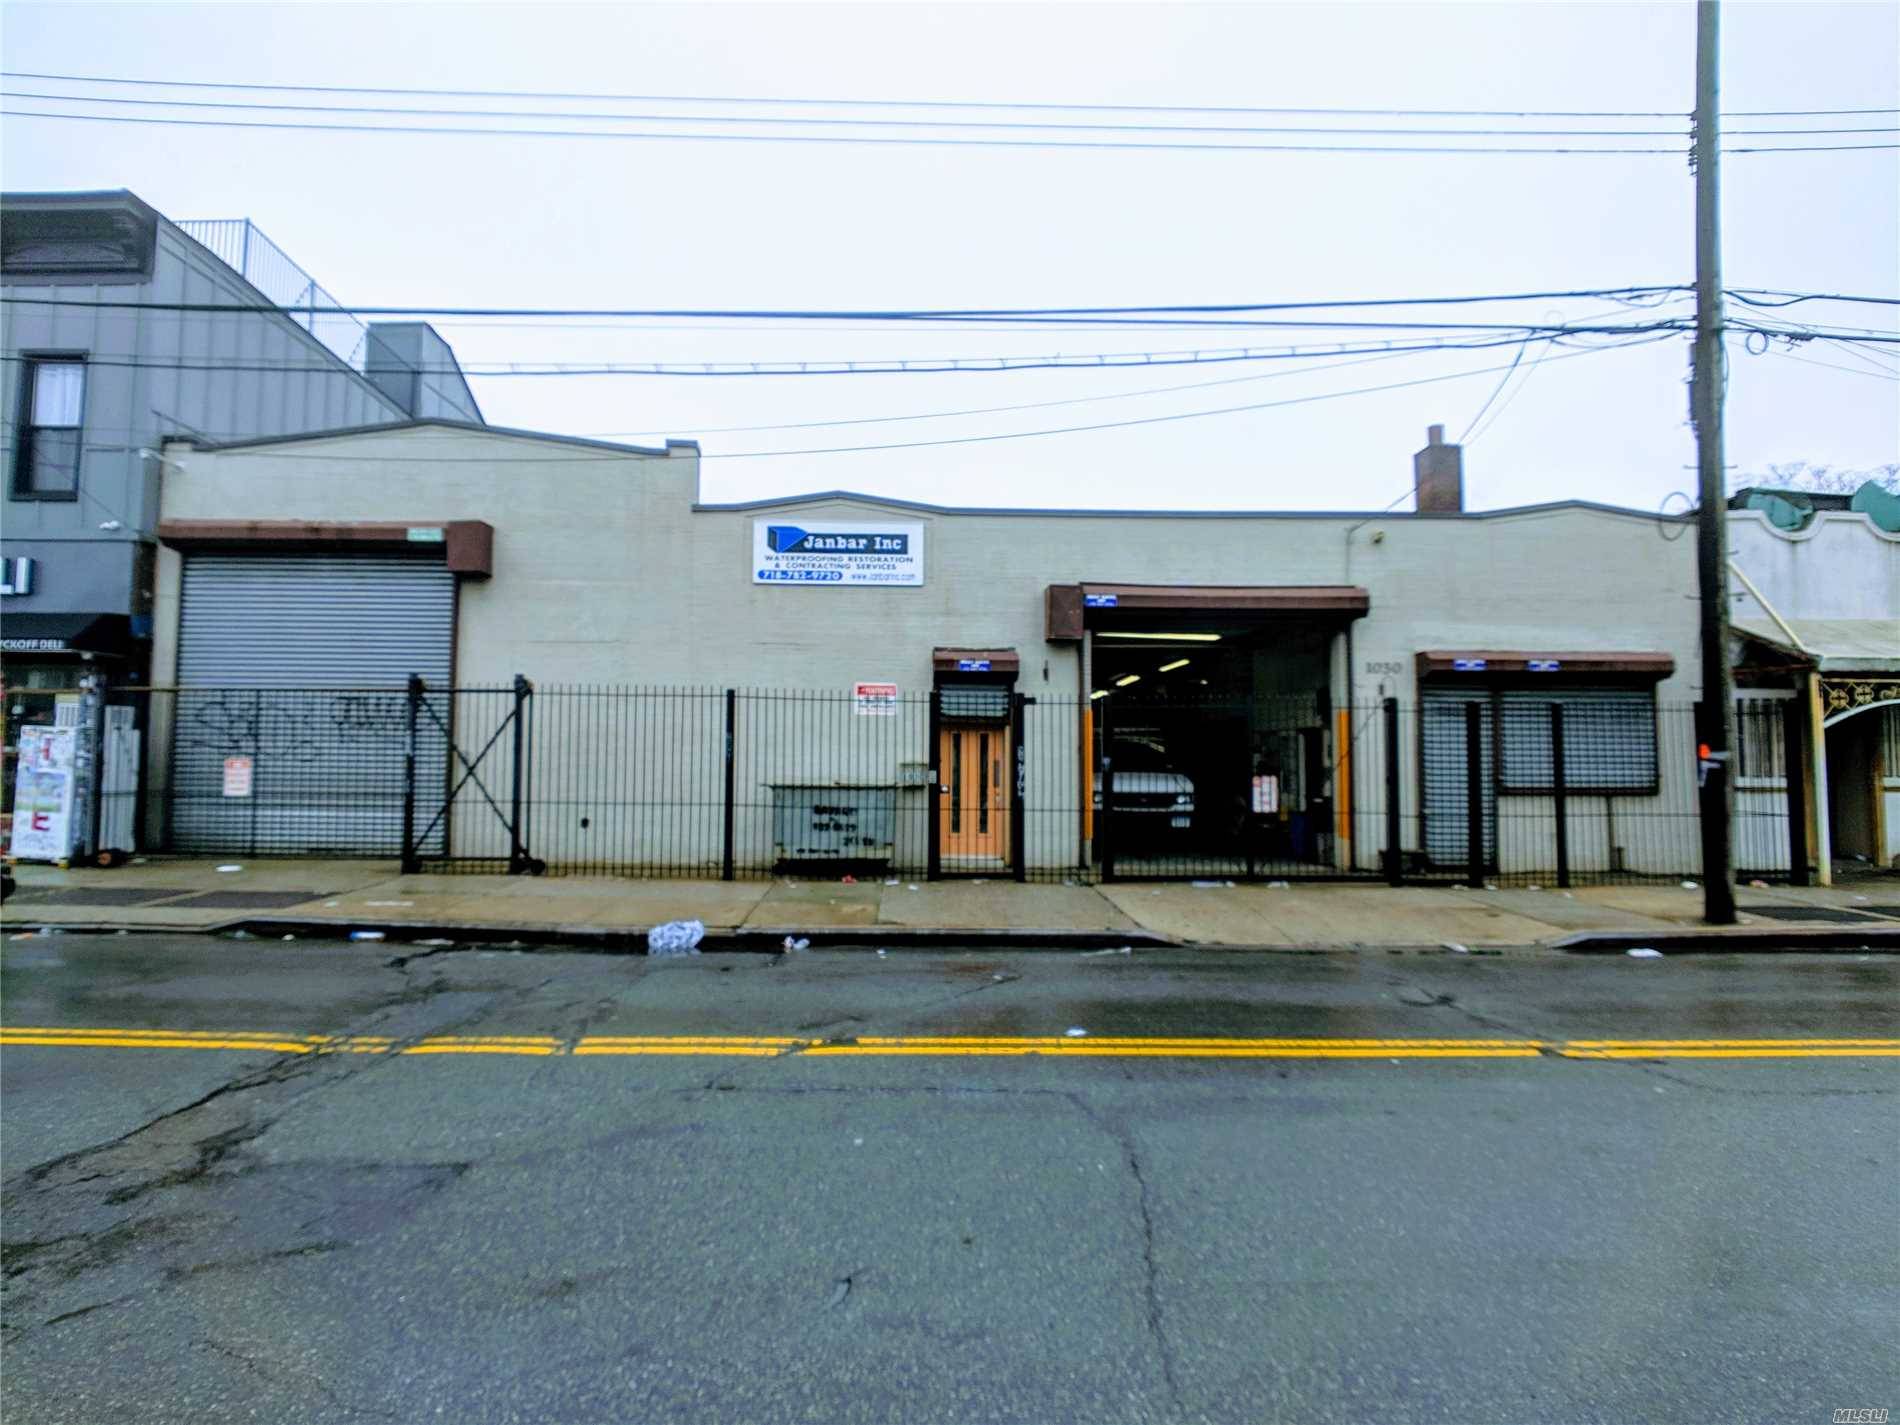 1030 1032 Wyckoff Ave, 2 Properties Business are sale w reputable business known as Janbar Inc, Waterproofing, Restoration and Contracting Service.